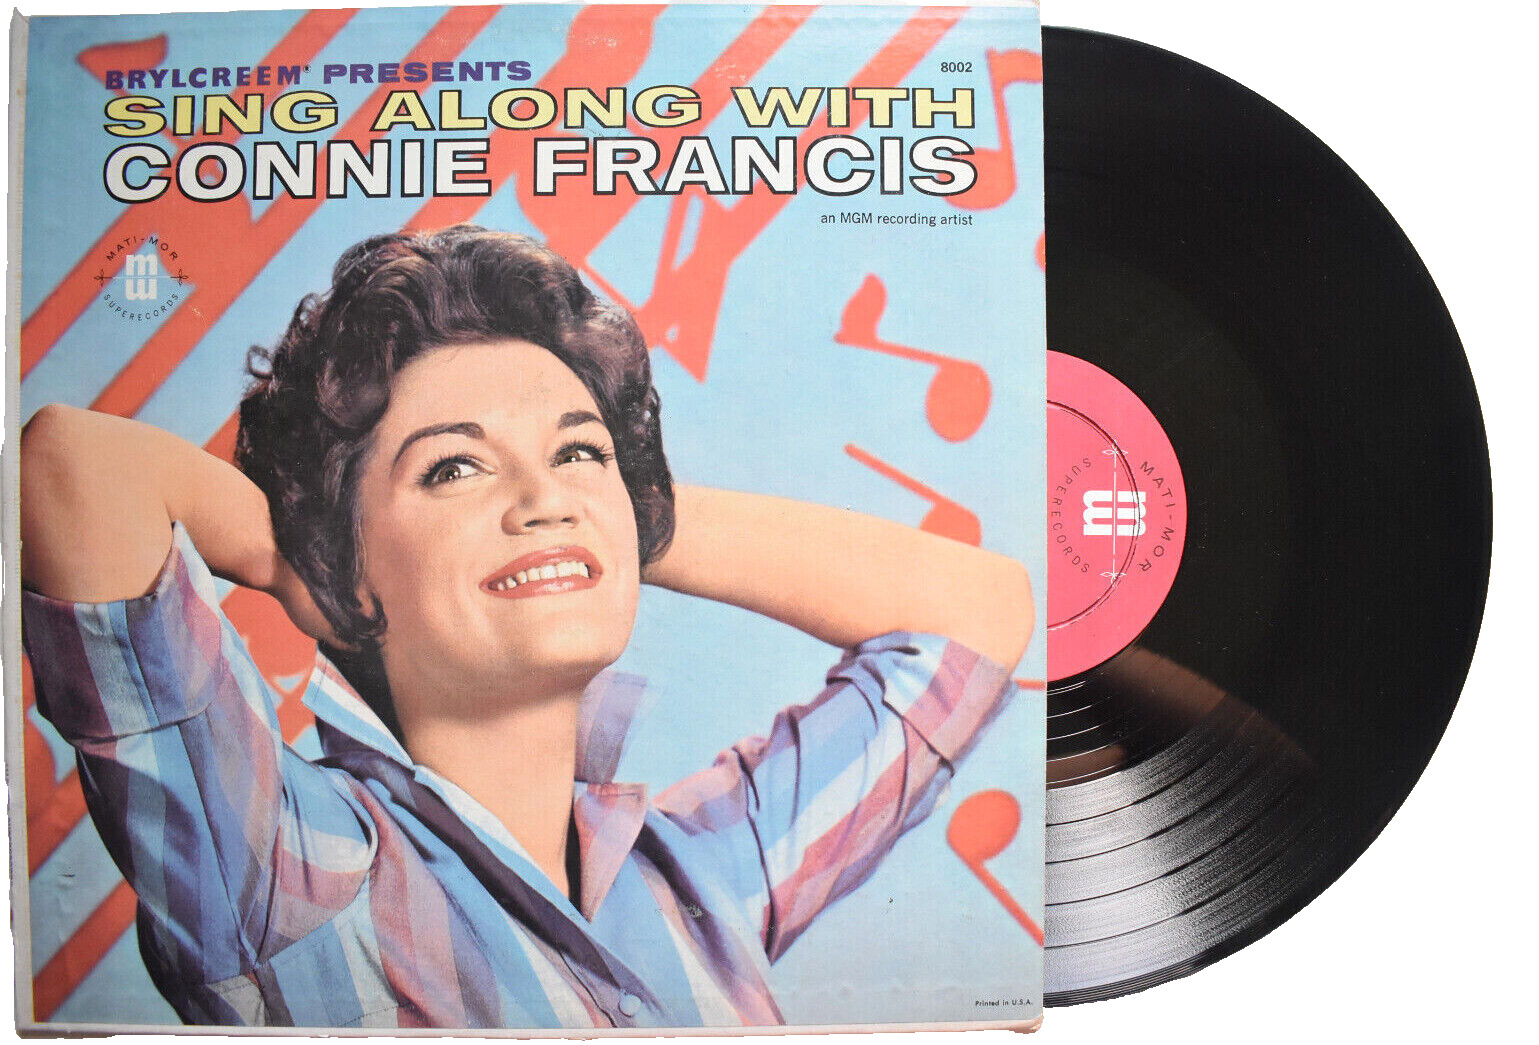 SING ALONG WITH CONNIE FRANCIS VINYL LP RECORD MATI-MOR 8002 POP VOCAL 1961